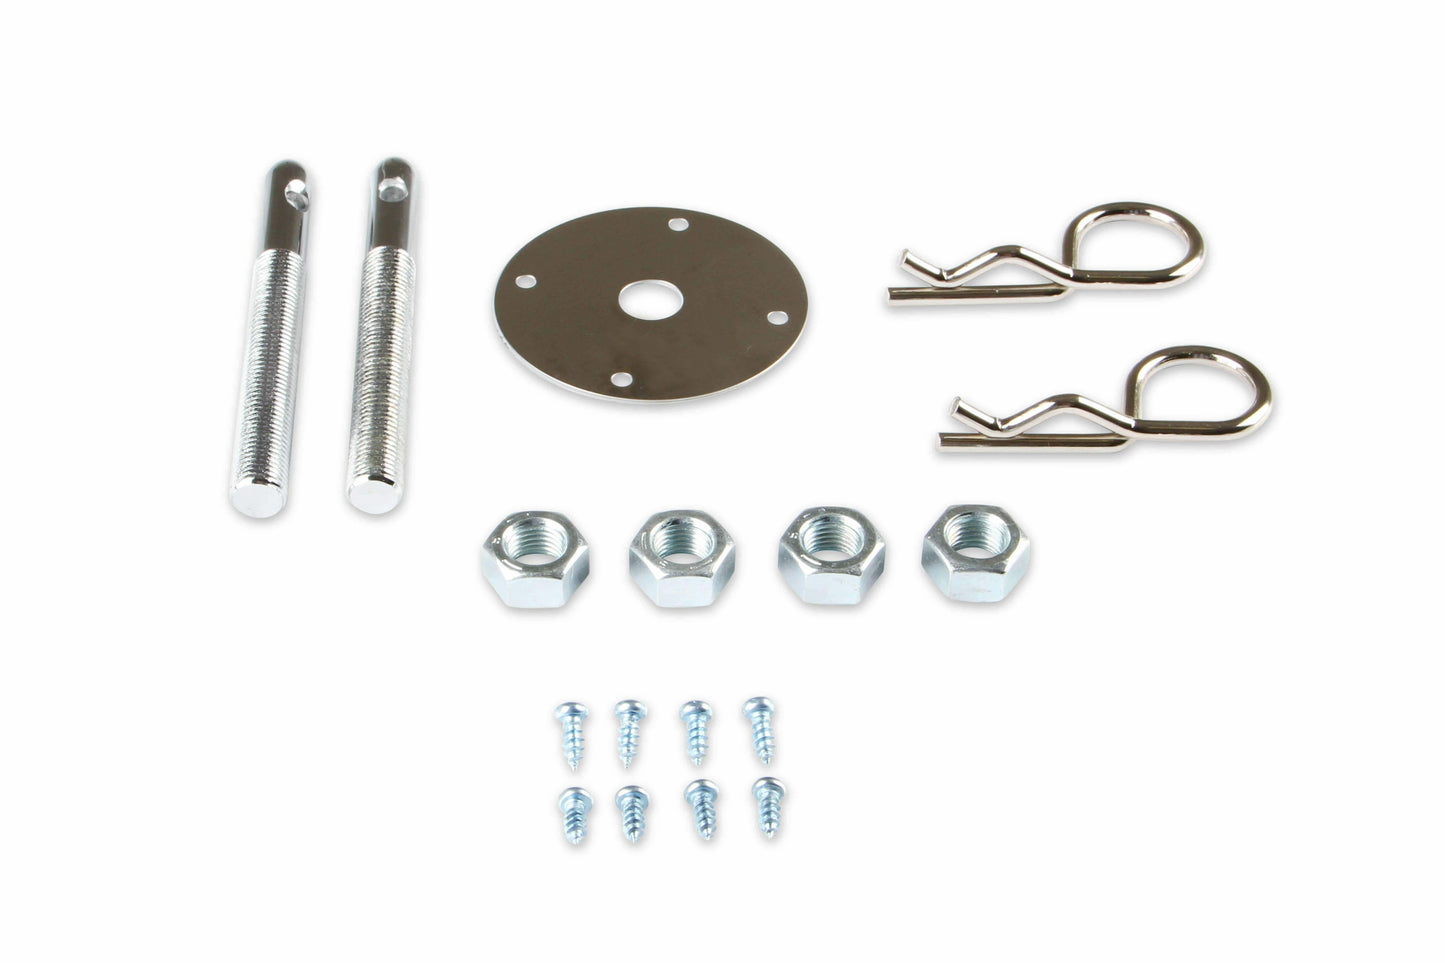 Trans Am Camaro Hood Pin Kit 7/16 w/ SAFETY PINS w/ SCREW IN PLATES